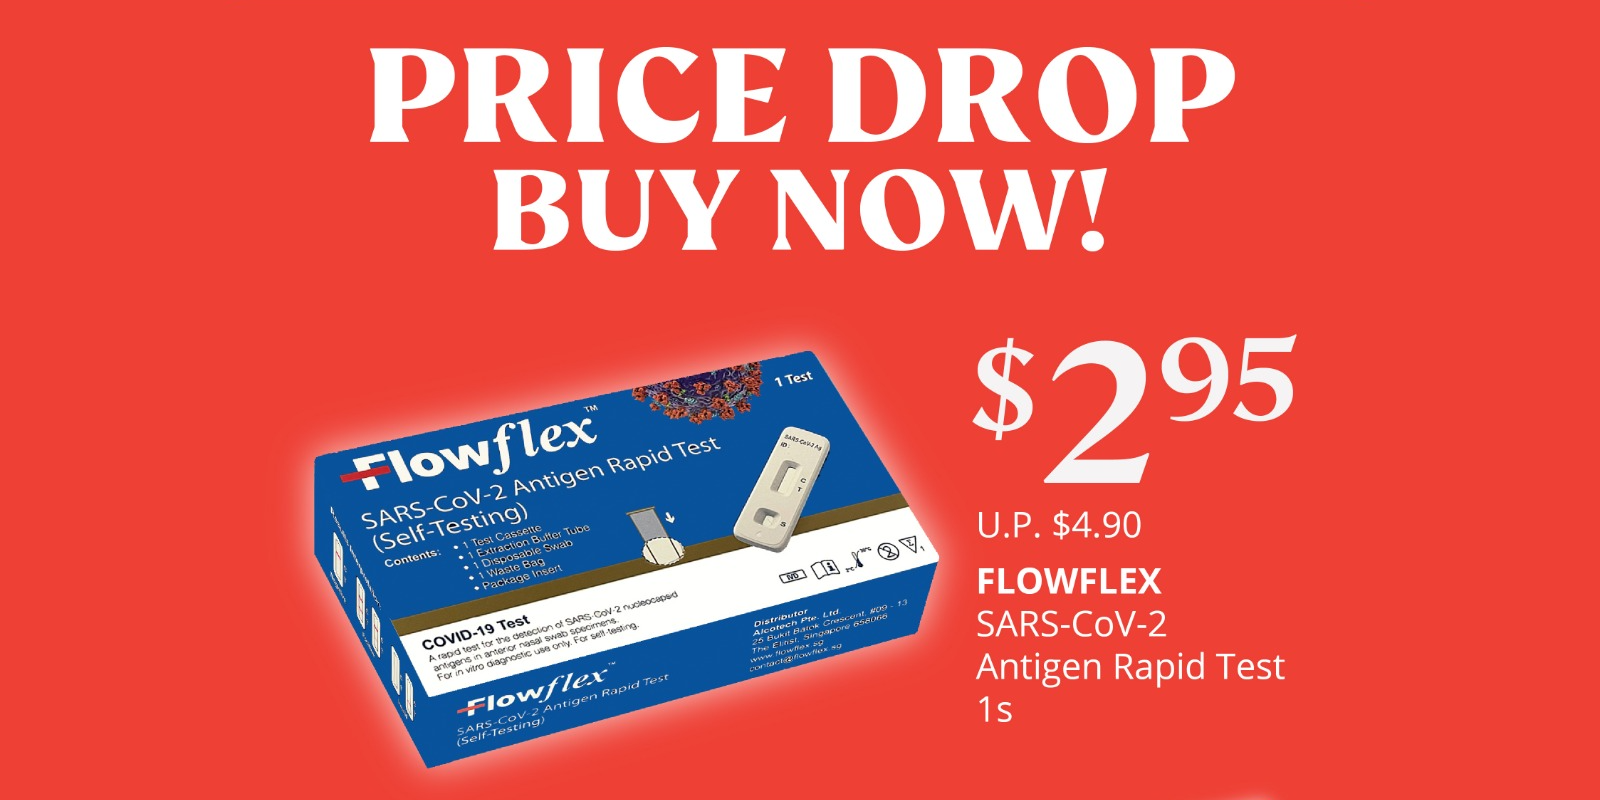 Cheapest price ever! Only $2.95 for a single pack Flowflex HSA-approved ART test kit!